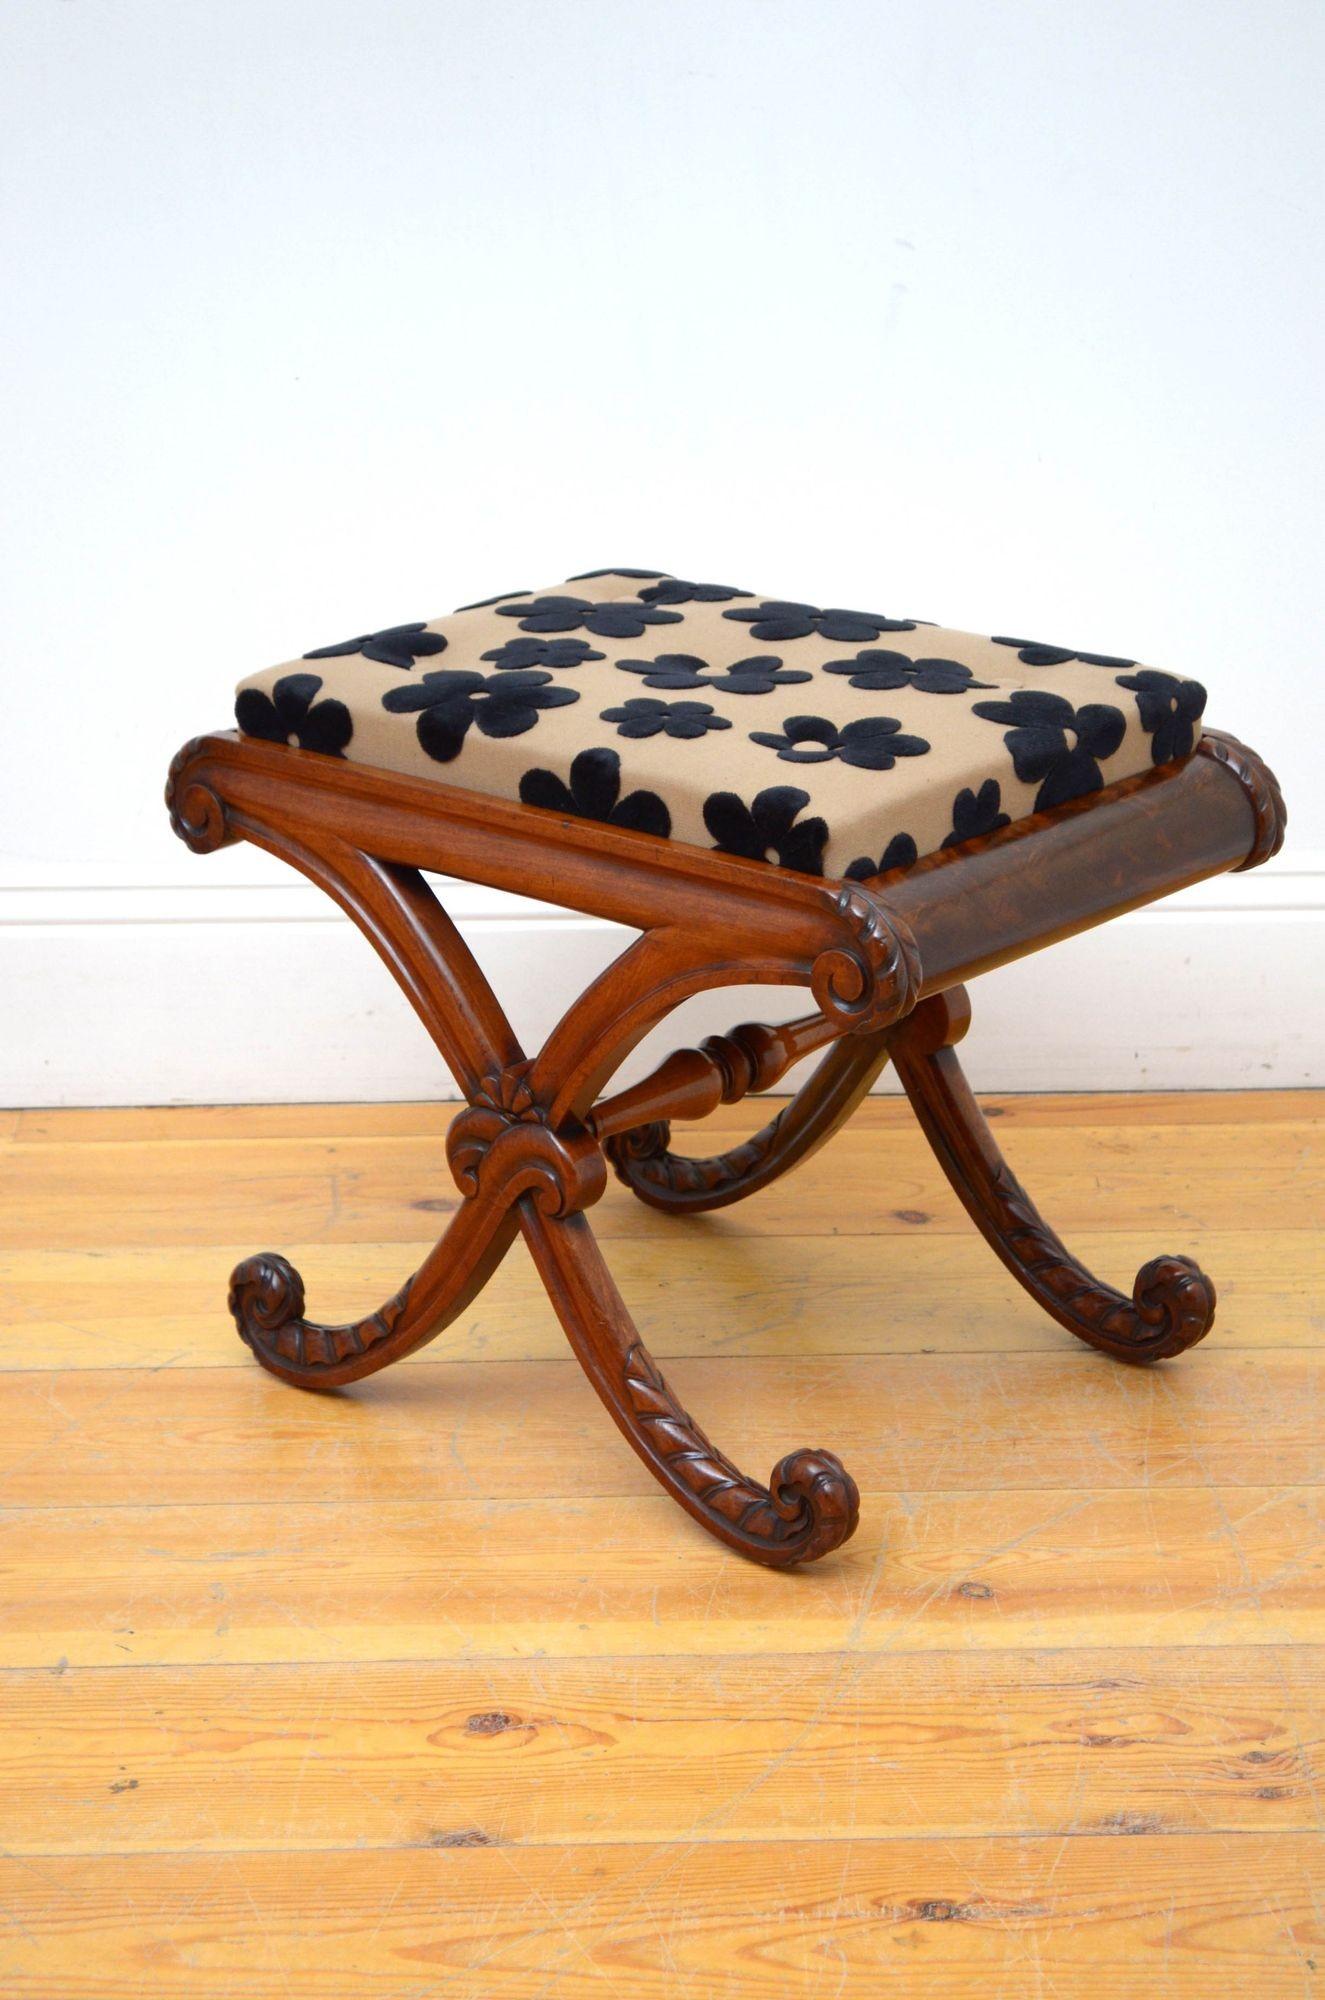 Sn5447 Attractive William Iv mahogany dressing table stool having newly recovered buttoned, drop in seat (brown fabric with black flowers) in finely carved X frame with decorative foliage carvings and turned stretcher. This antique stool is in home